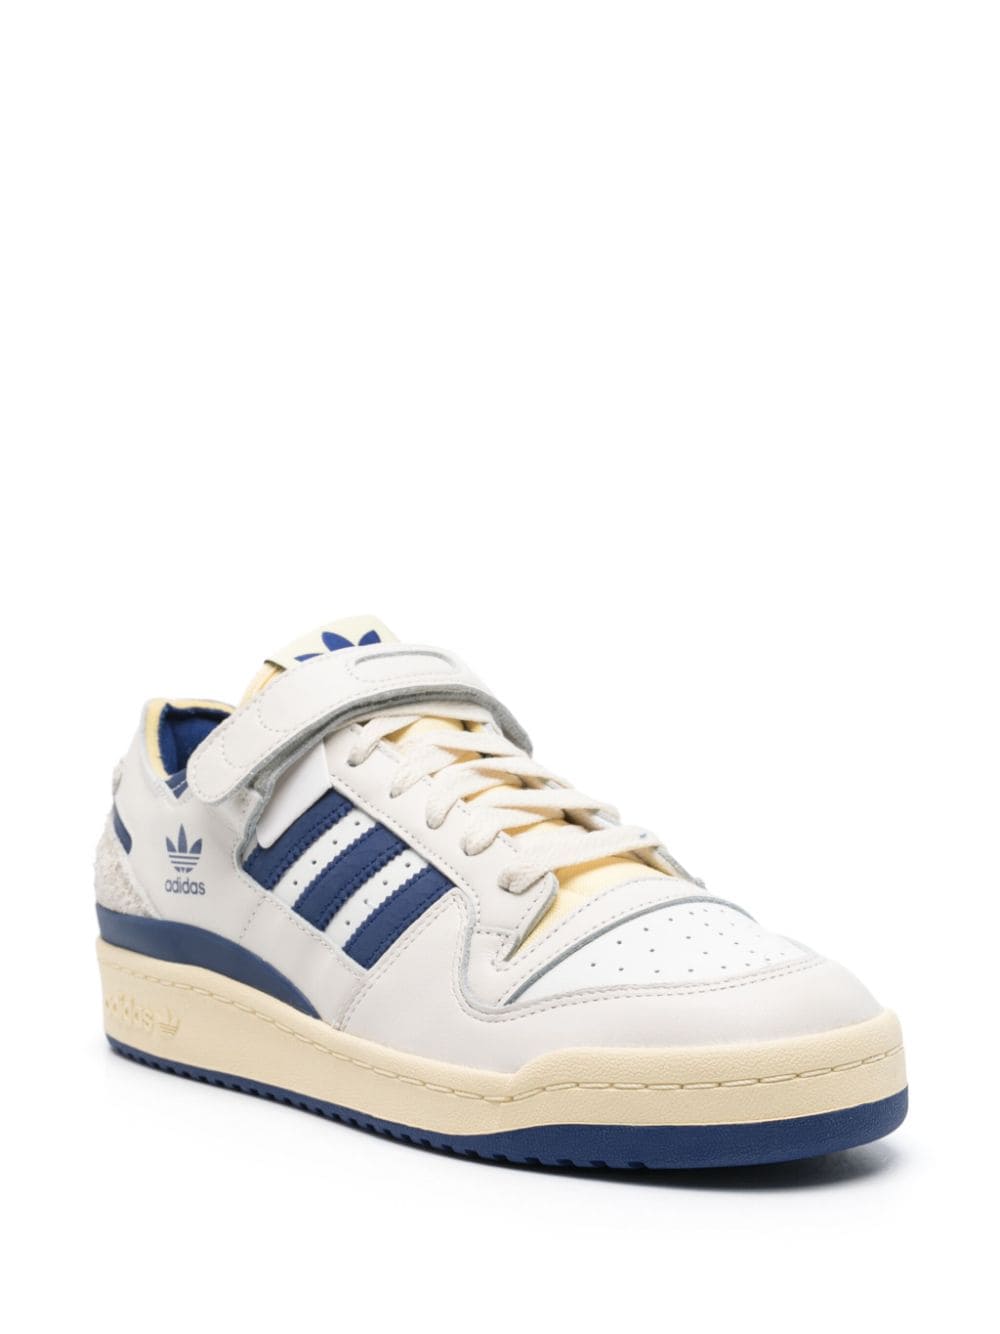 Shop Adidas Originals Forum 84 Leather Sneakers In White